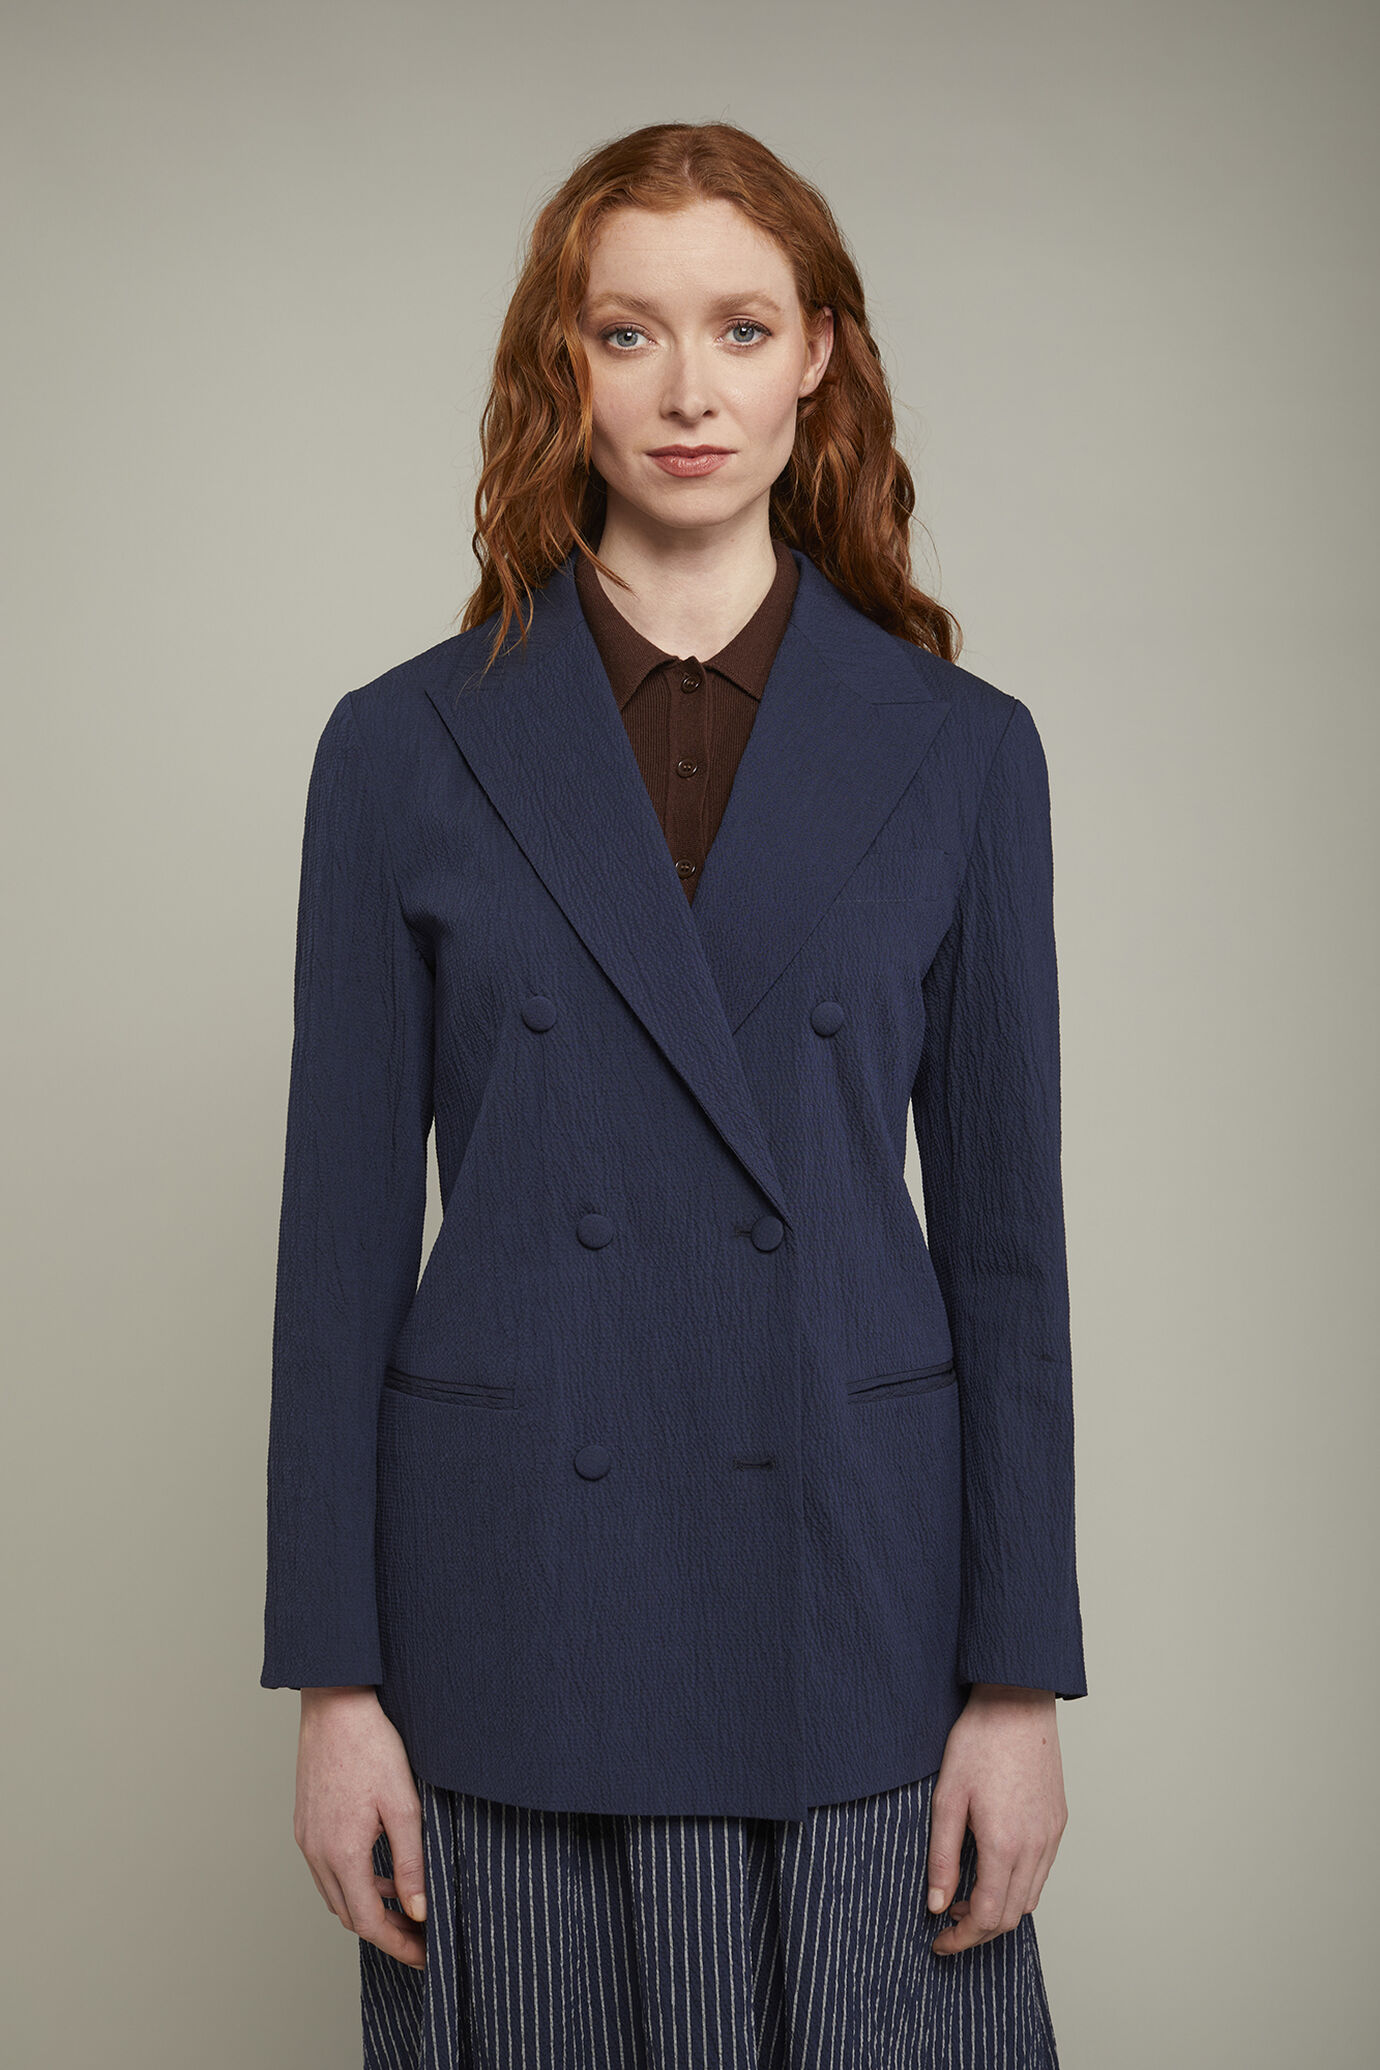 Women’s double-breasted blazer regular fit image number 2